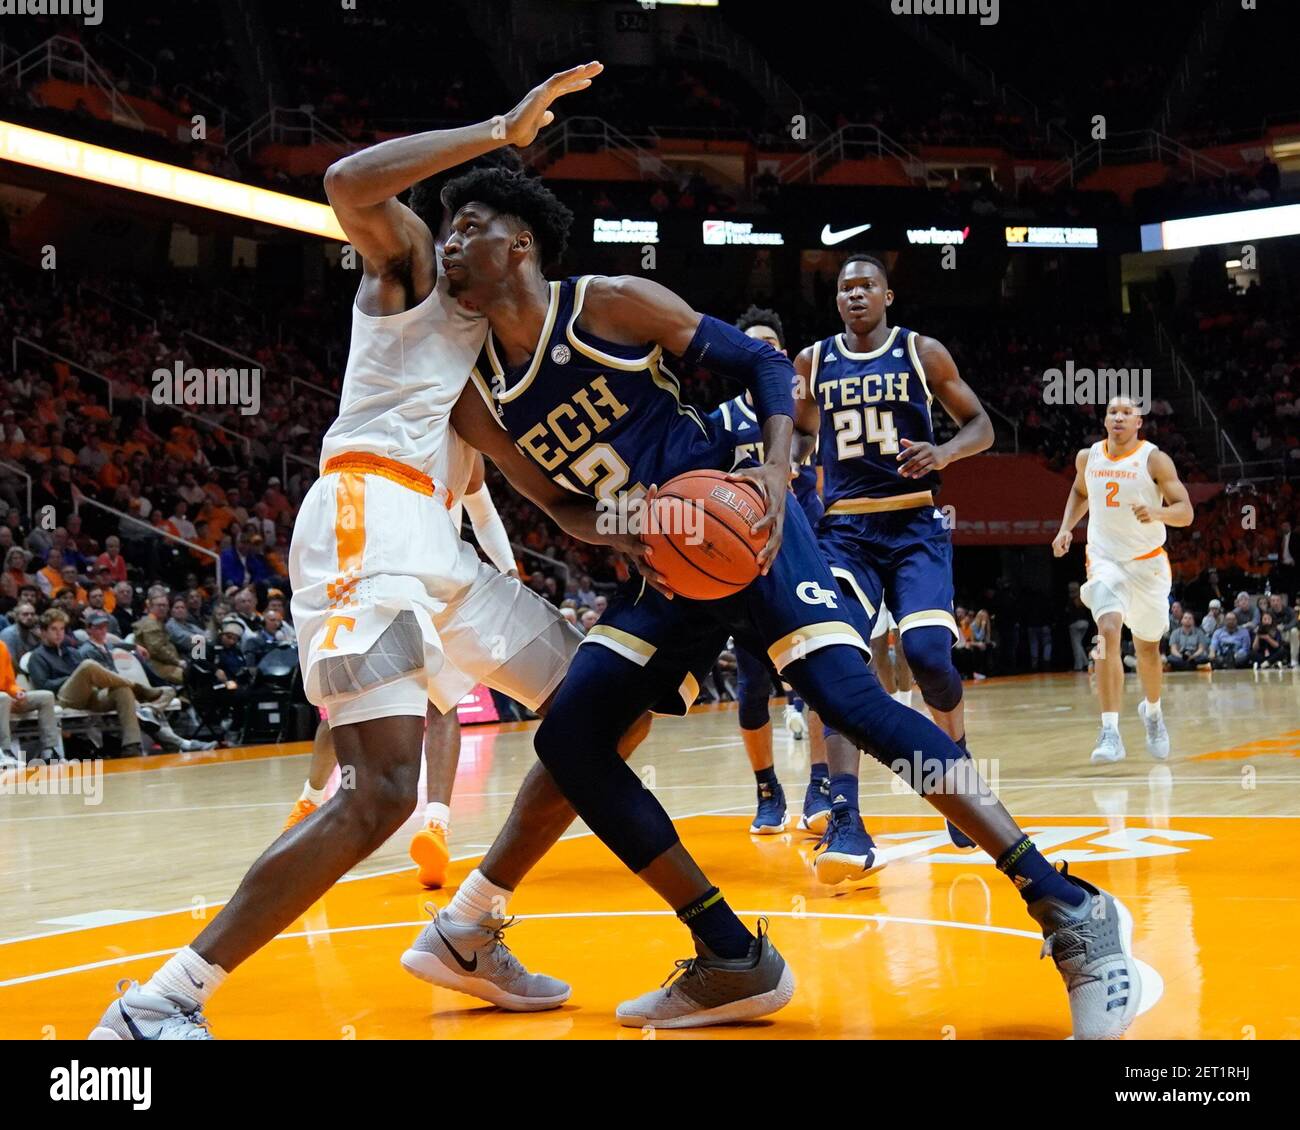 November 13, 2018: Khalid Moore #12 of the Georgia Tech Yellow Jackets  drives to the basket against Kyle Alexander #11 of the Tennessee Volunteers  during the NCAA basketball game between the University